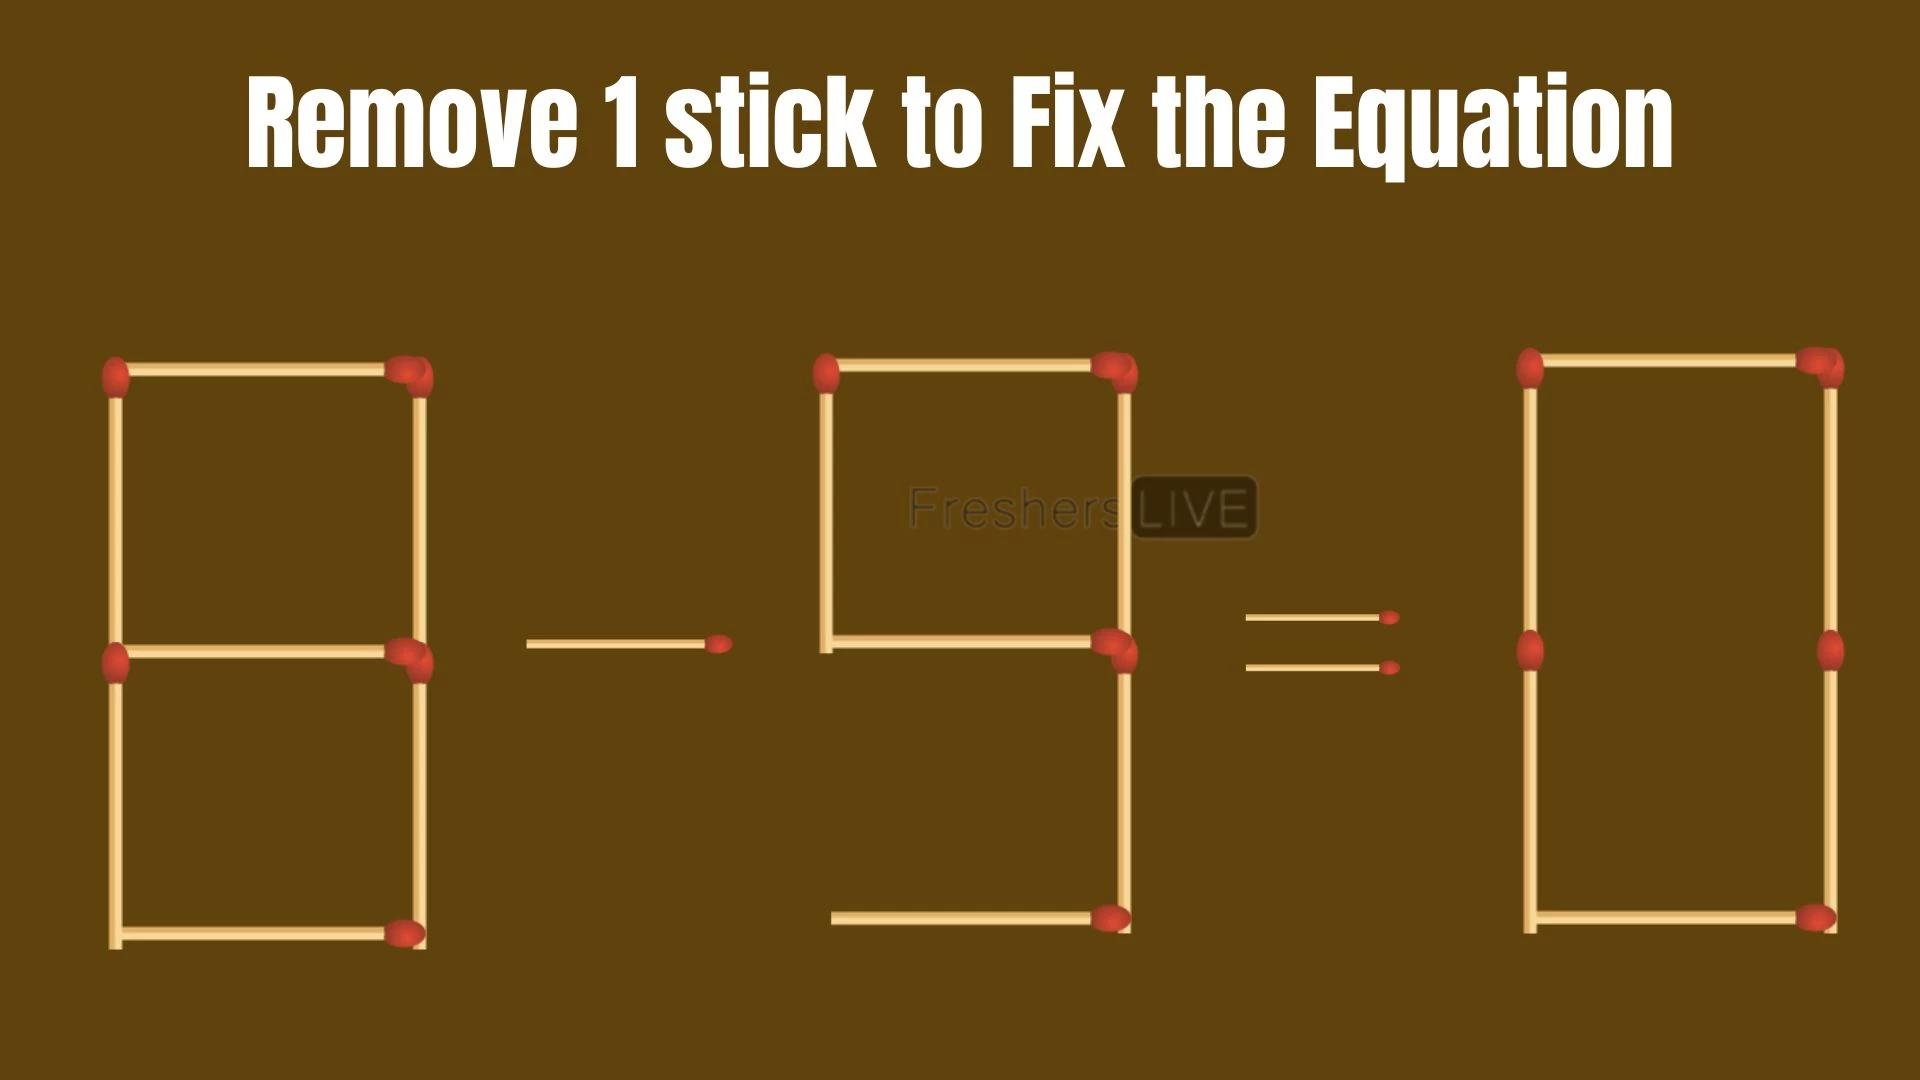 Solve the Puzzle Where 8-9=0 by Removing 1 Stick to Fix the Equation